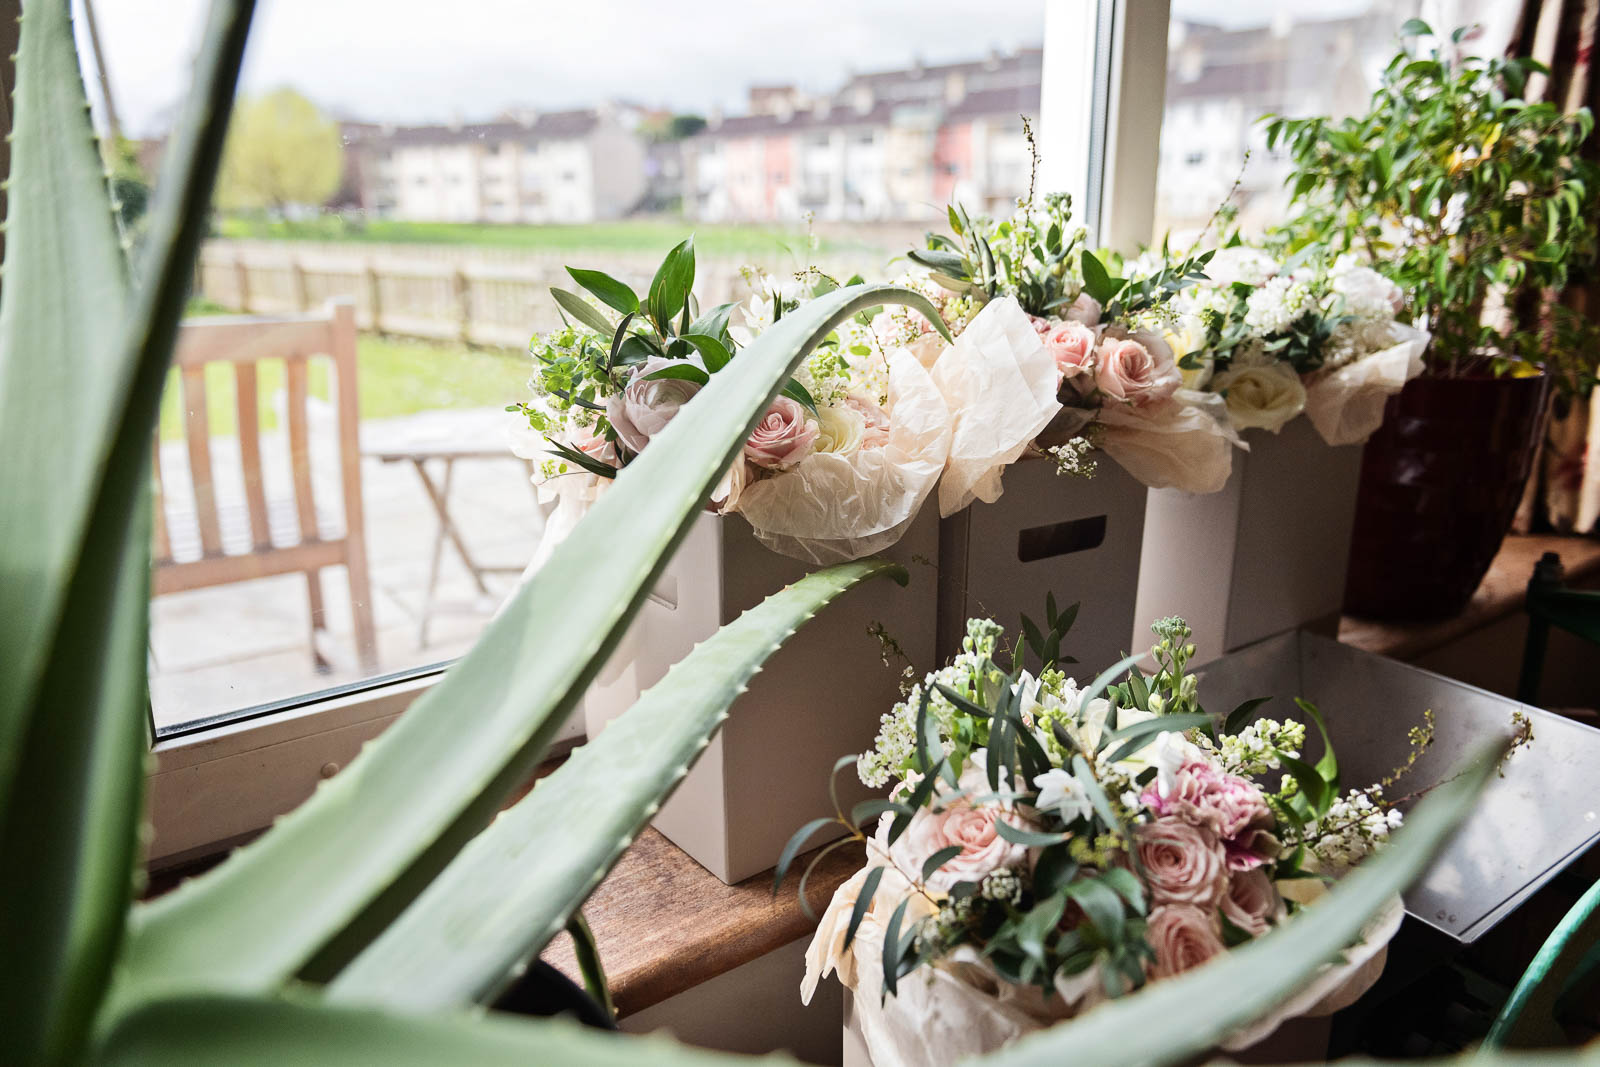 Gorgeous wedding flowers in a bay window, surrounded by home succulent plants